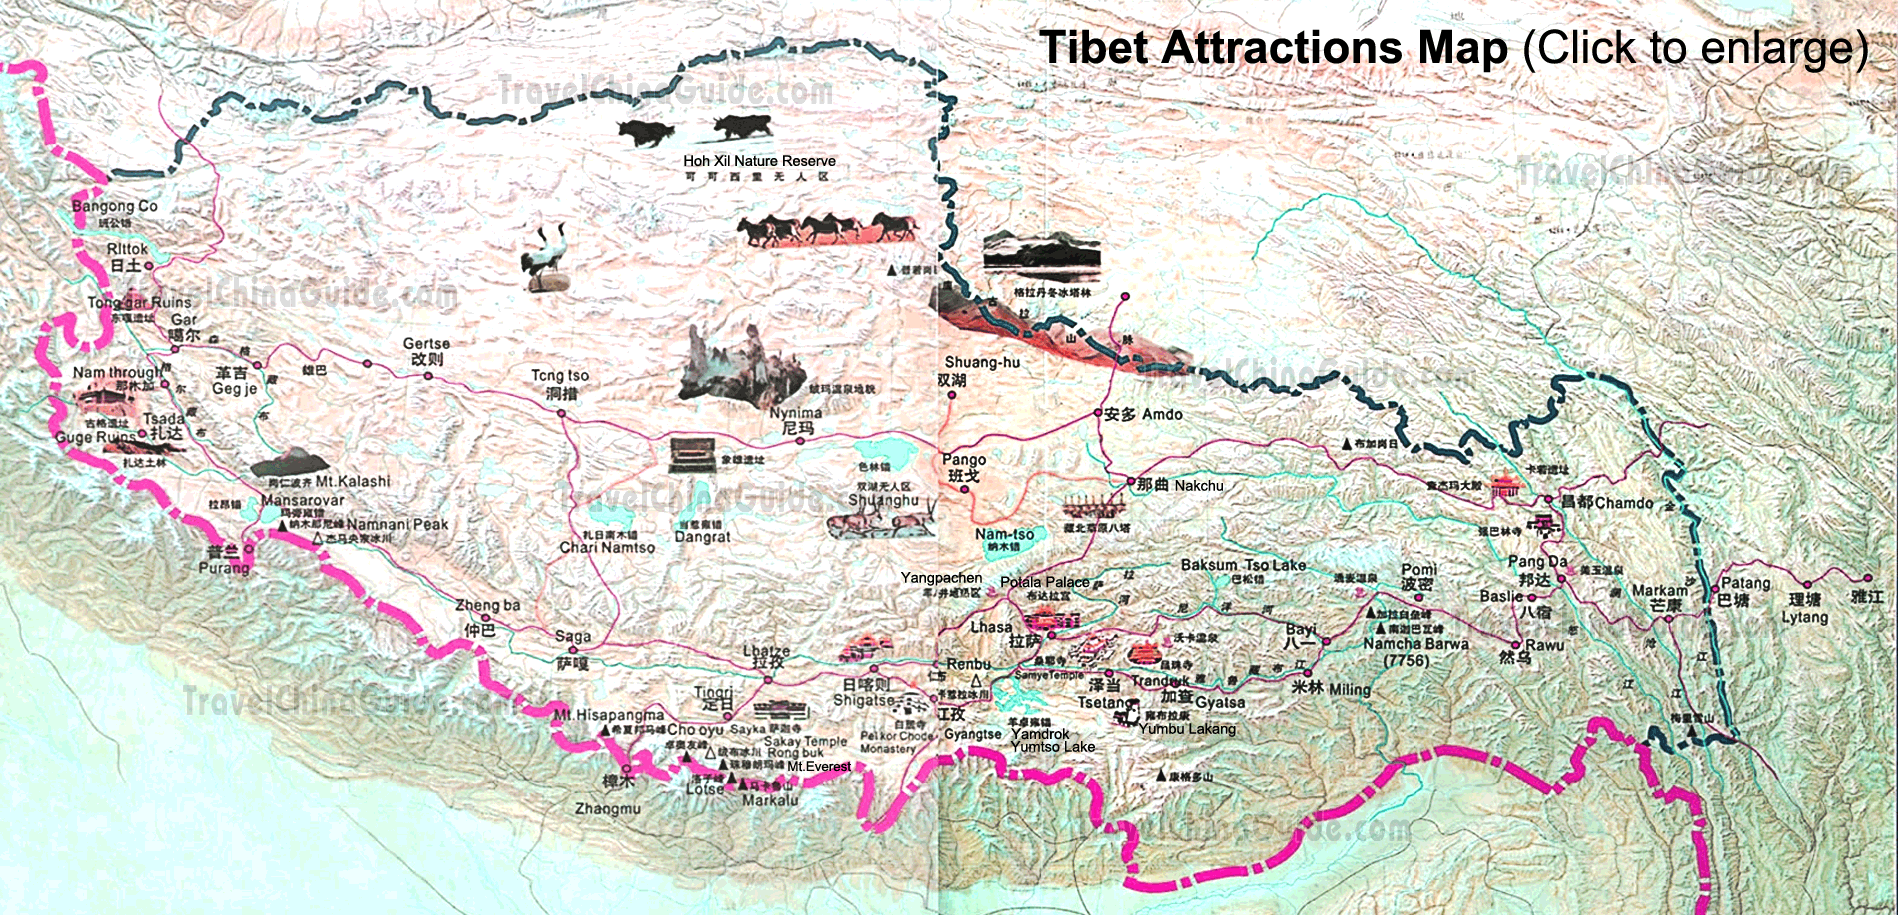 Tibet Maps, China: Cities, Attractions, Transportation